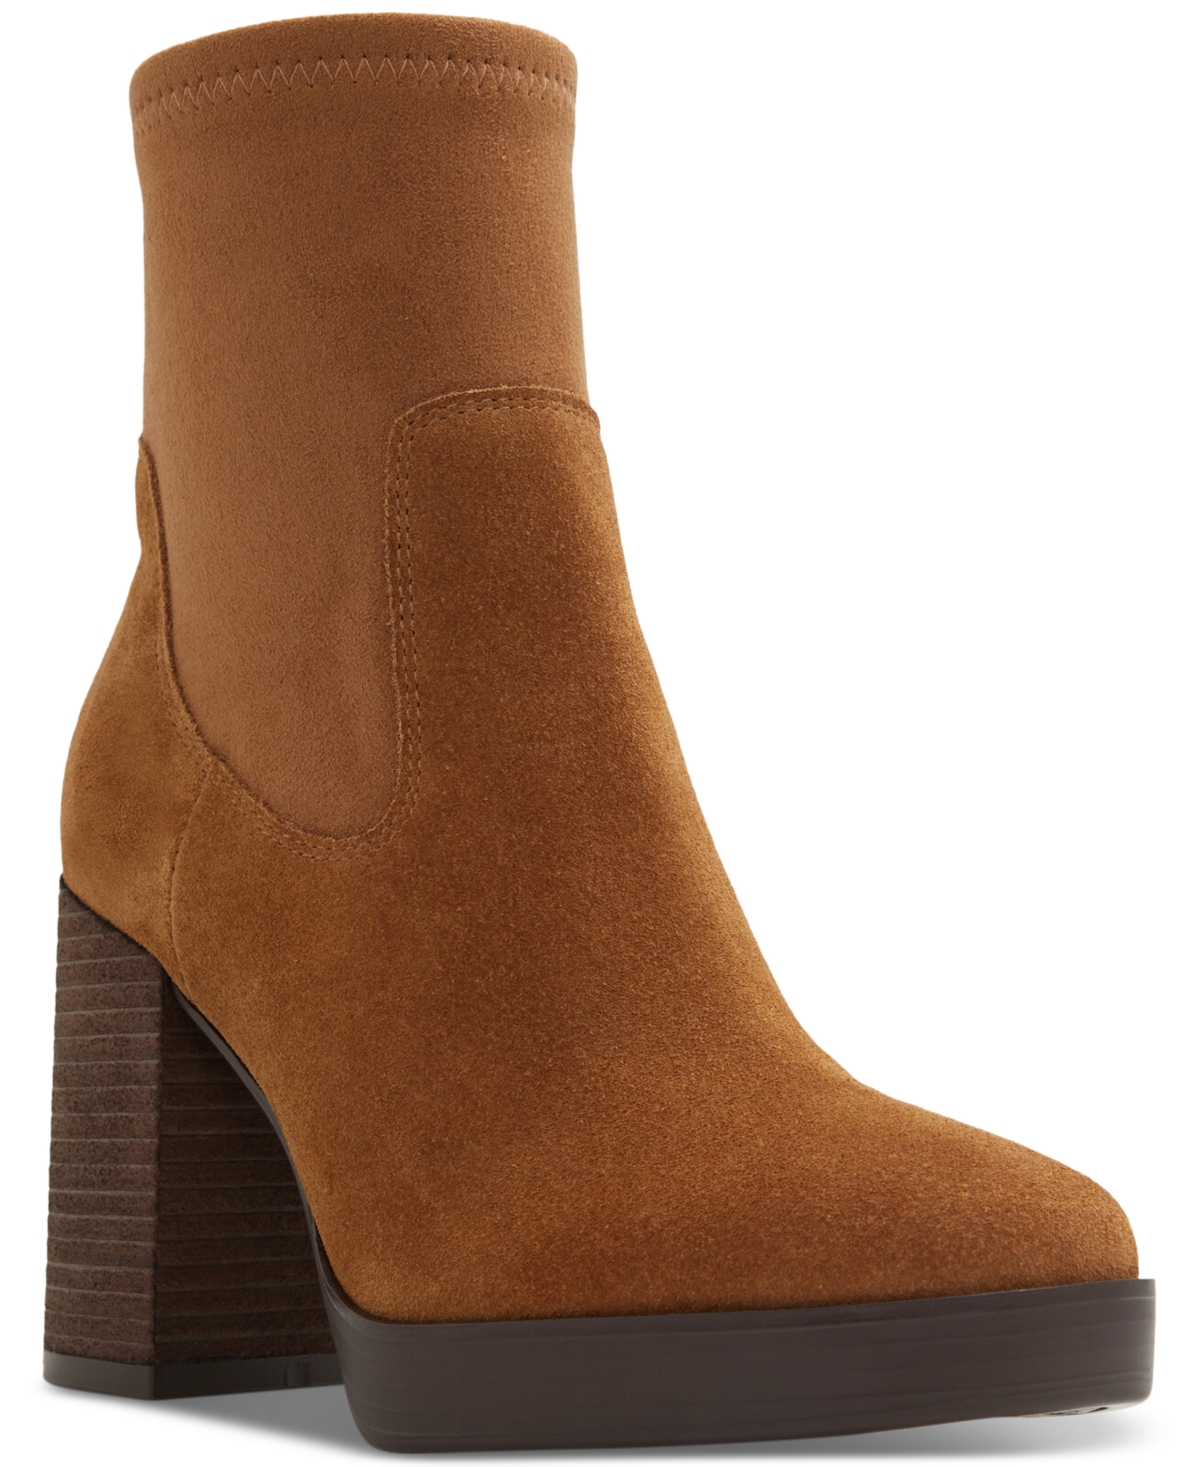 Voss Pull-On Dress Ankle Booties - Dark Brown